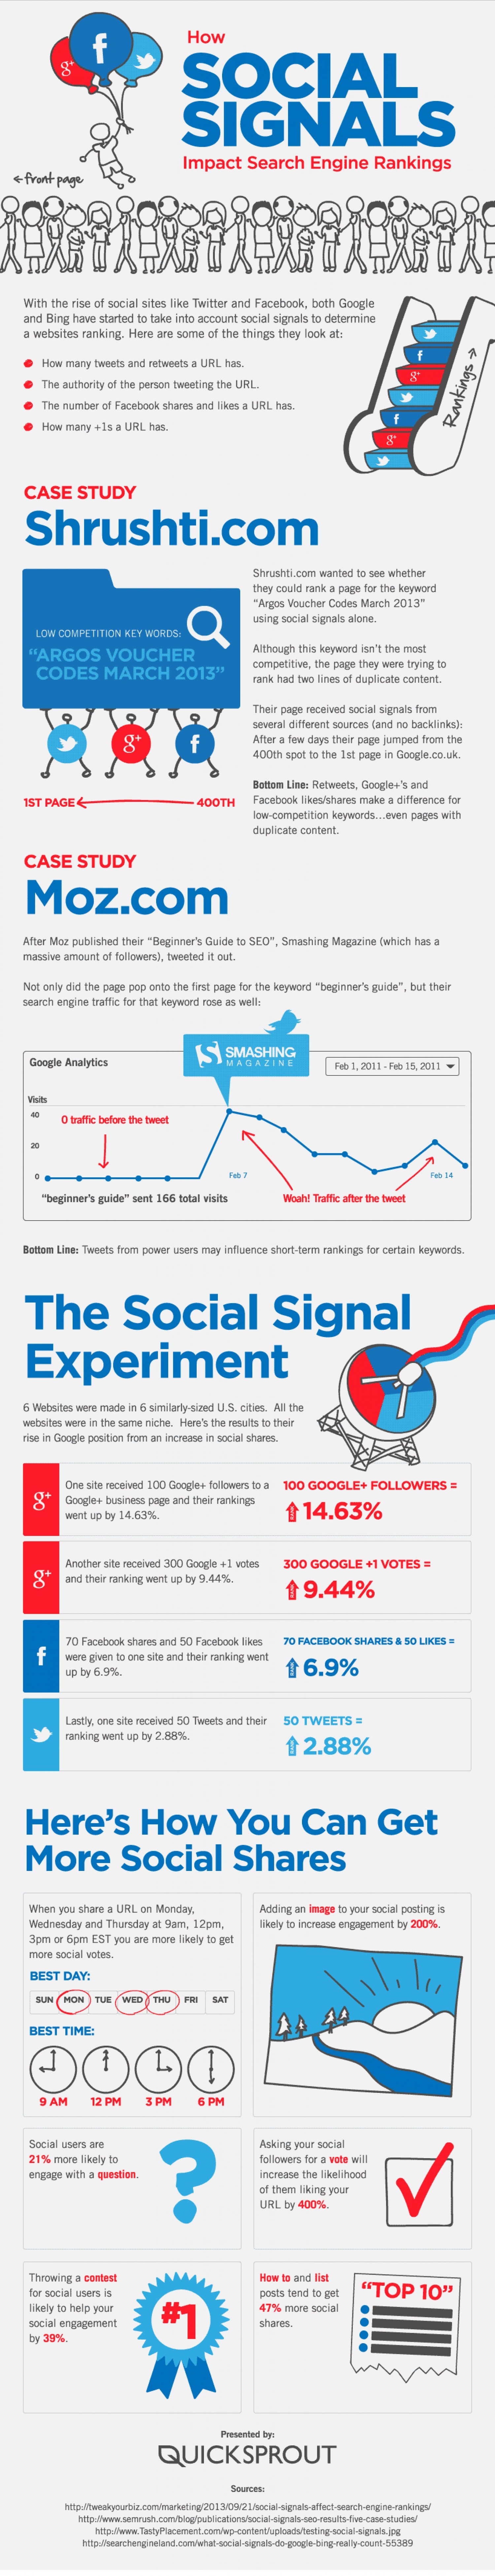 How social signals increase search engine rankings